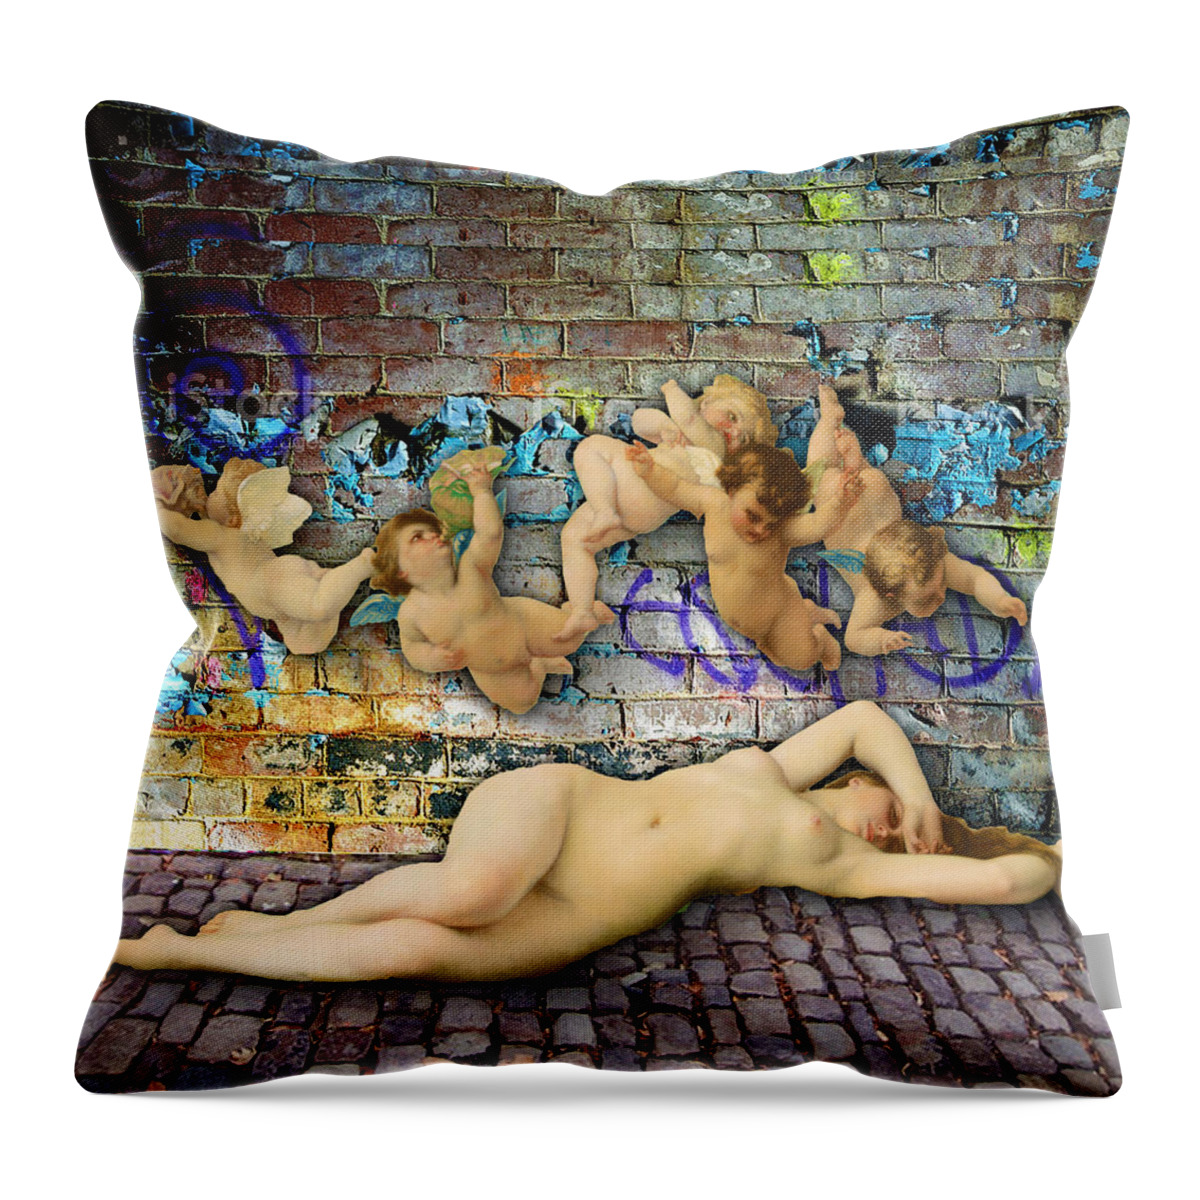 Abstract Throw Pillow featuring the painting Graffiti Birth Of Venus by Tony Rubino